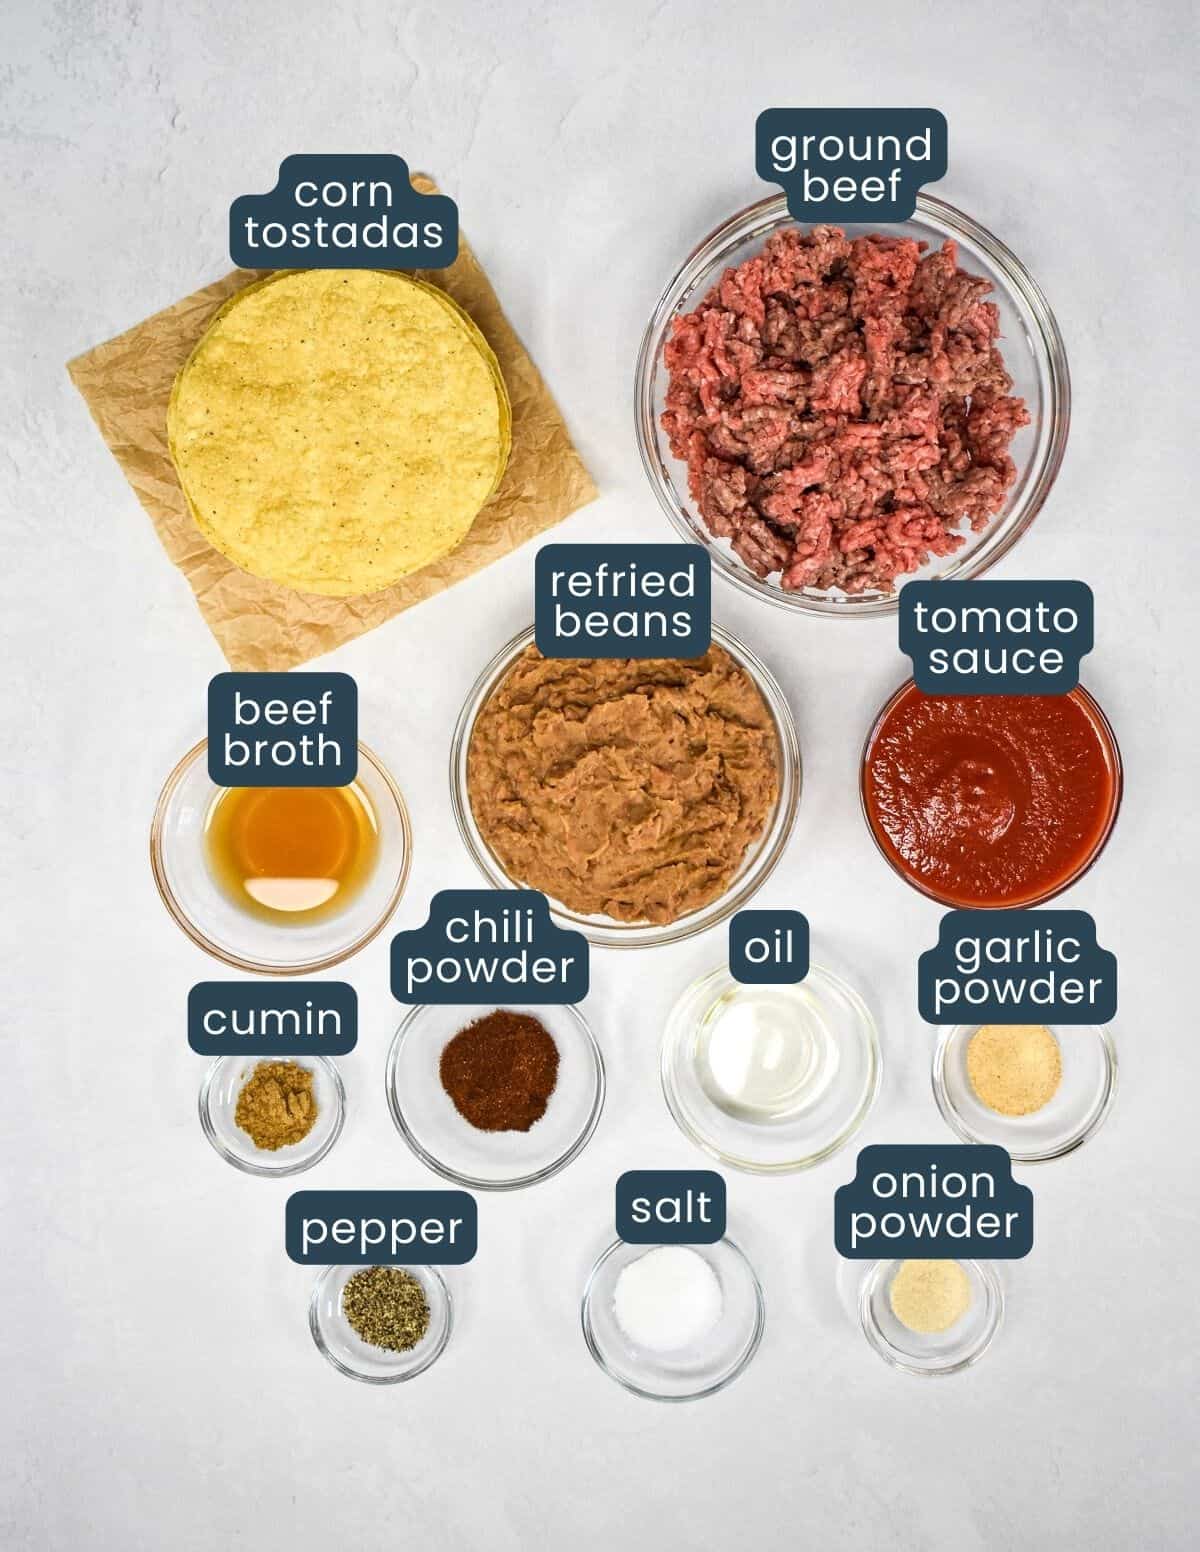 The ingredients for the tostadas, prepped and arranged in glass bowls on a white table with each labeled with blue and white letters.